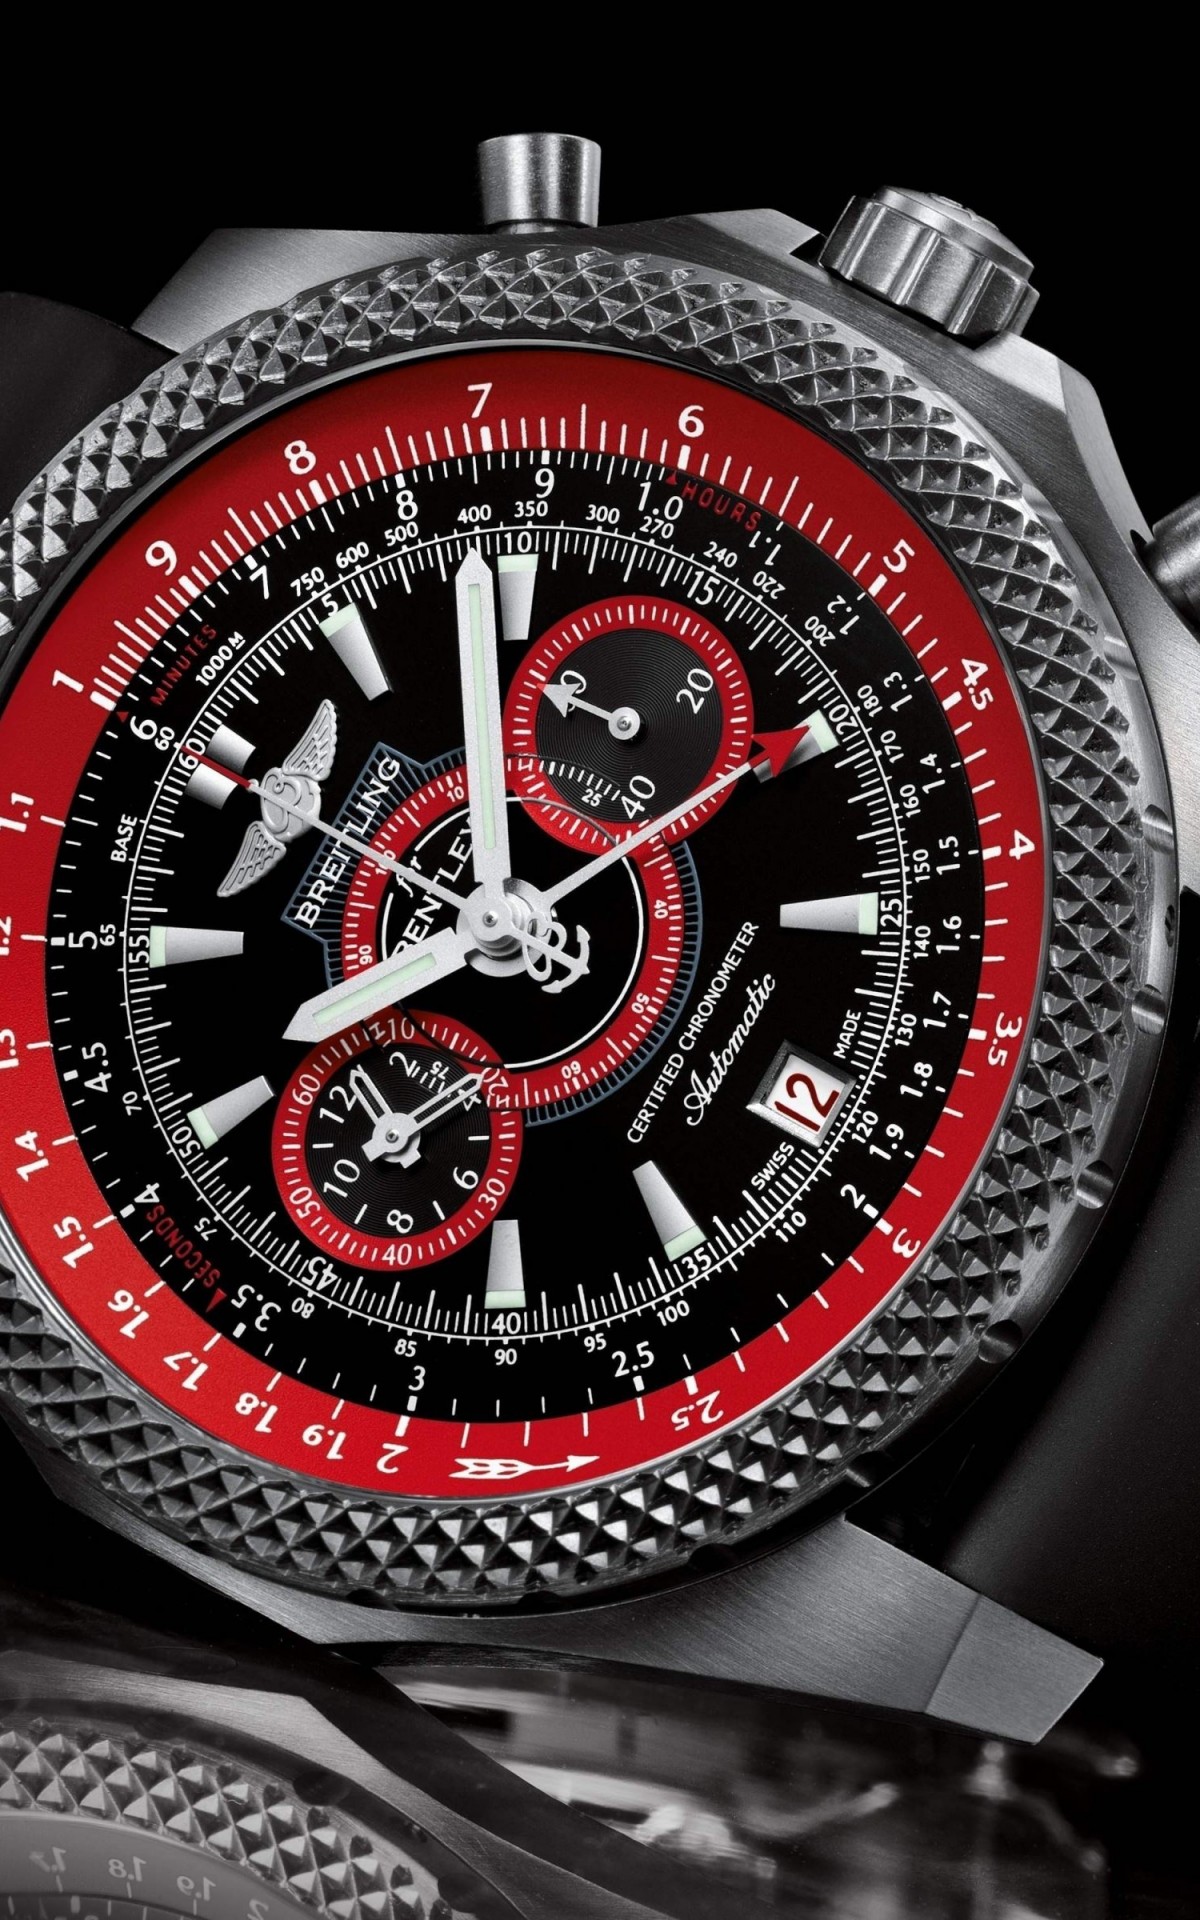 Breitling Watch Wallpaper for Amazon Kindle Fire HDX